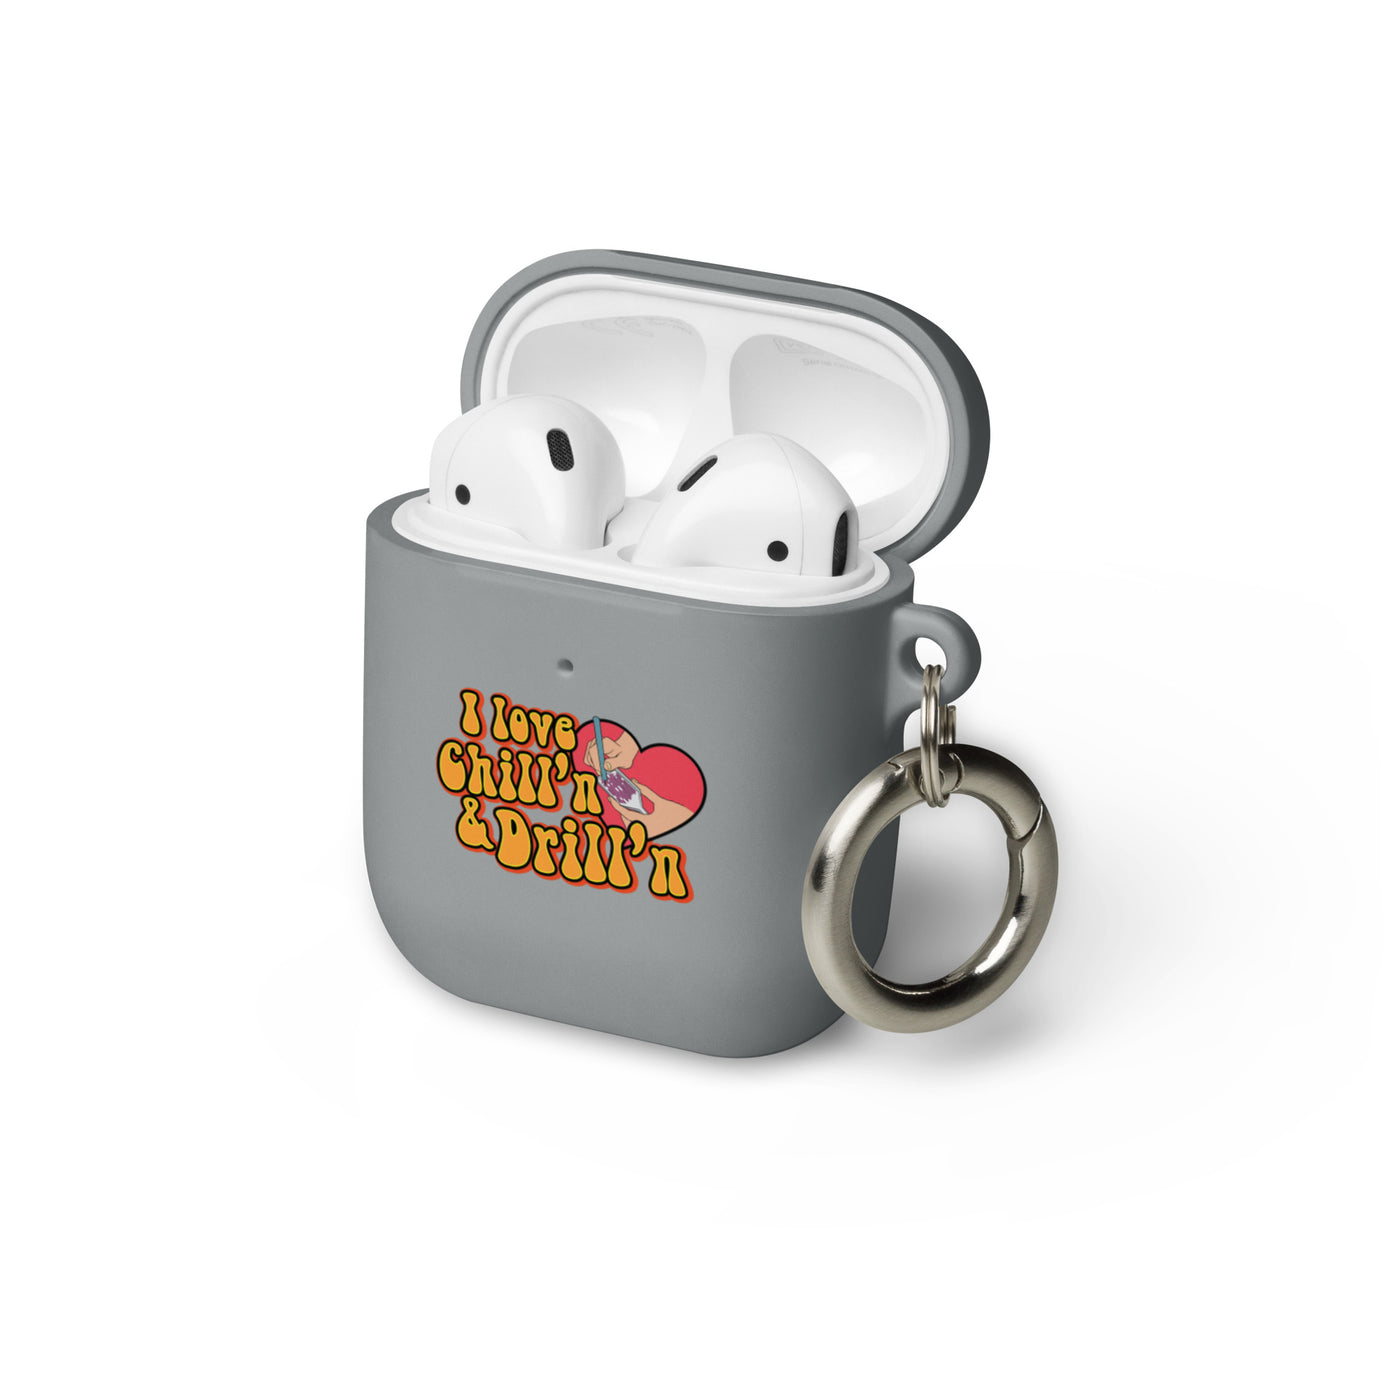 I love Chill'n & Drill'n AirPods case